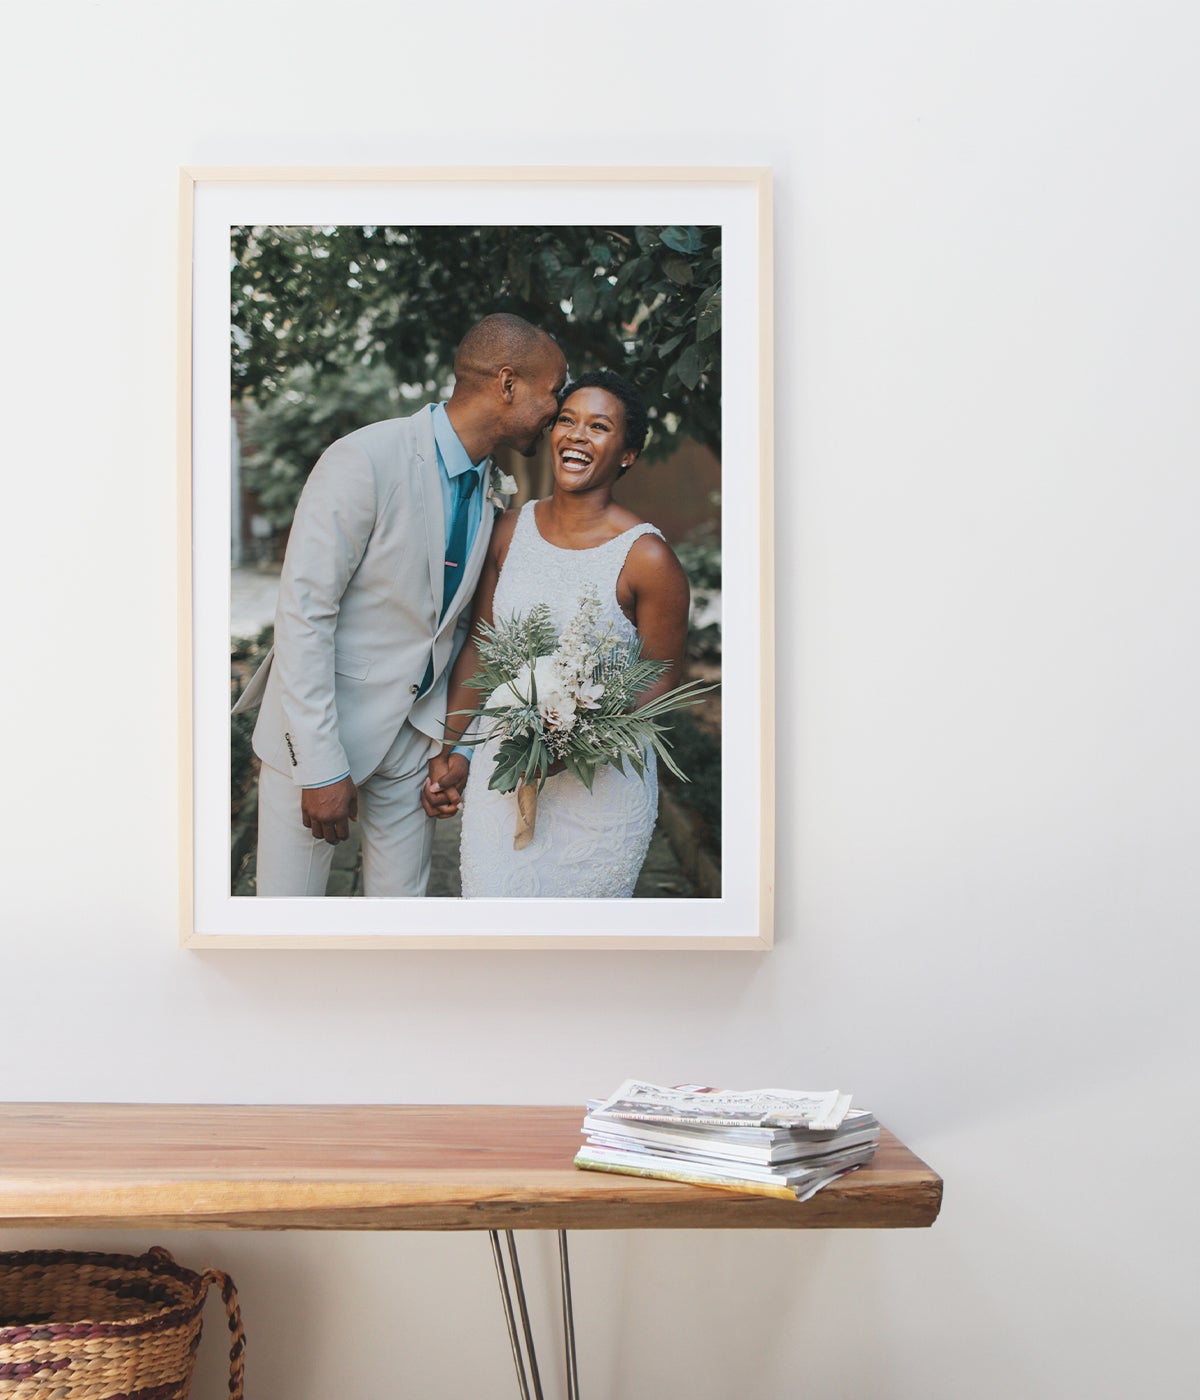 Large framed wedding print of young couple above wood bench